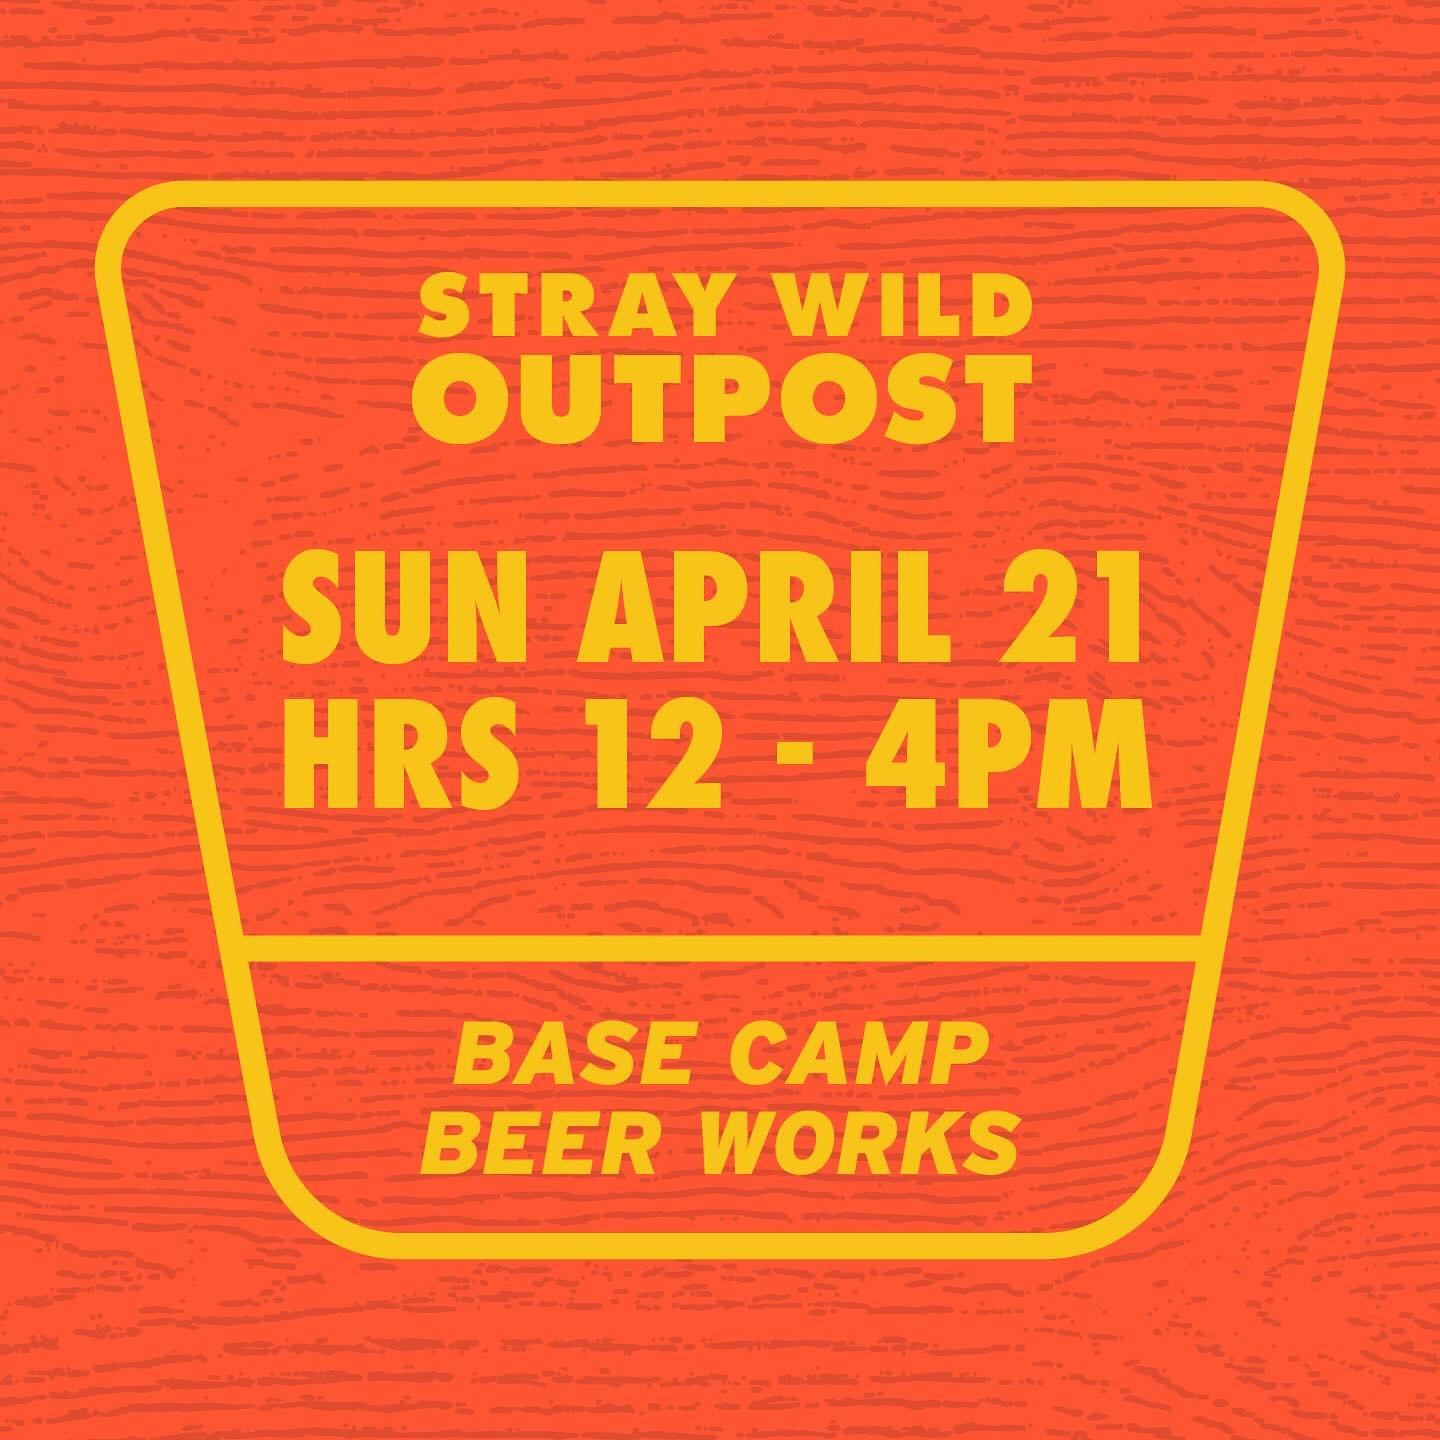 This Sunday, a day before Earth Day I&rsquo;ll be posted up at @basecampbeerworks among many other lovely local artists selling our wares. Hope to see ya there!